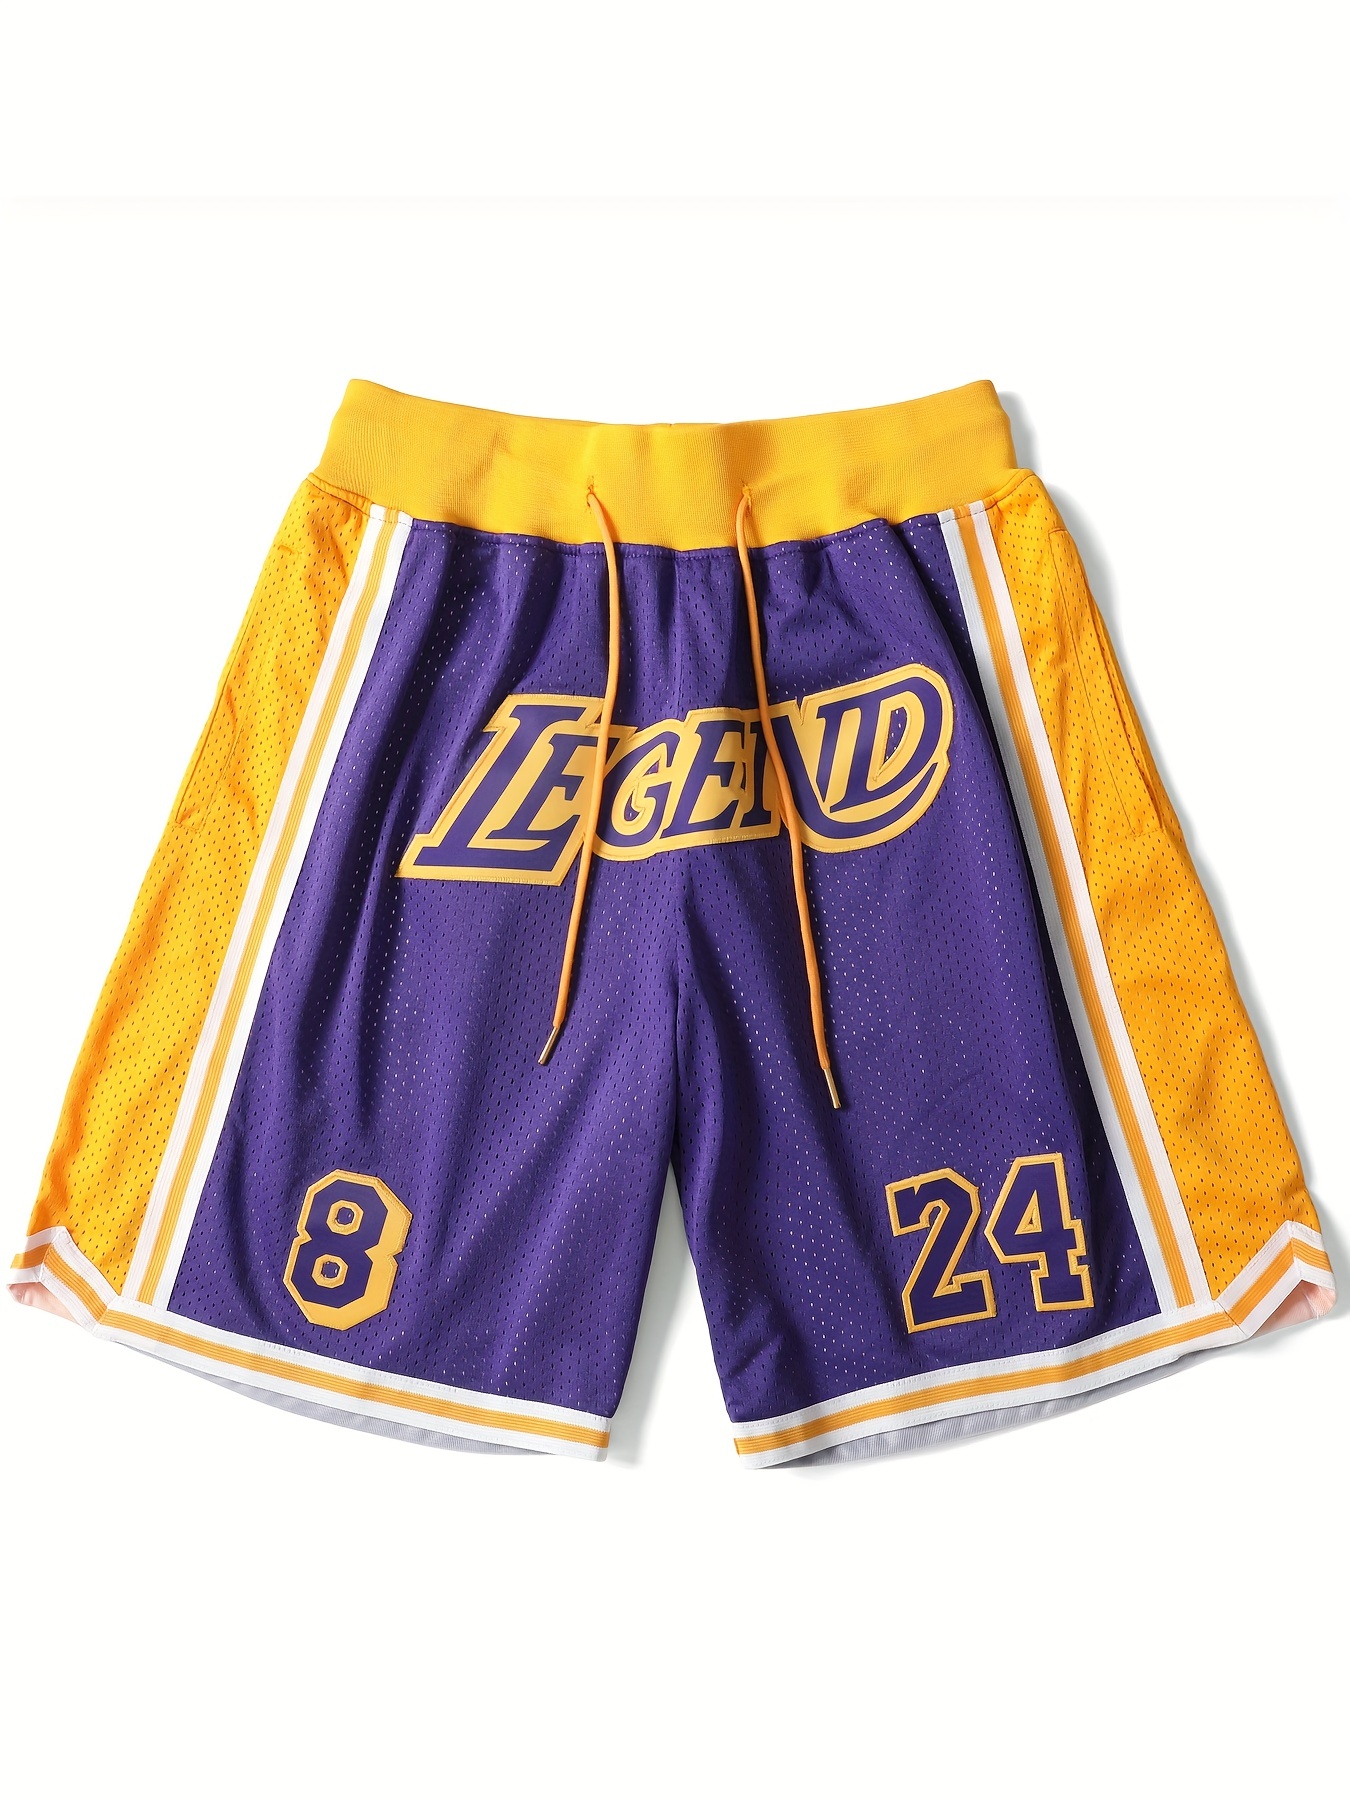 NBA Shorts Men's Black Lakers All Stitched